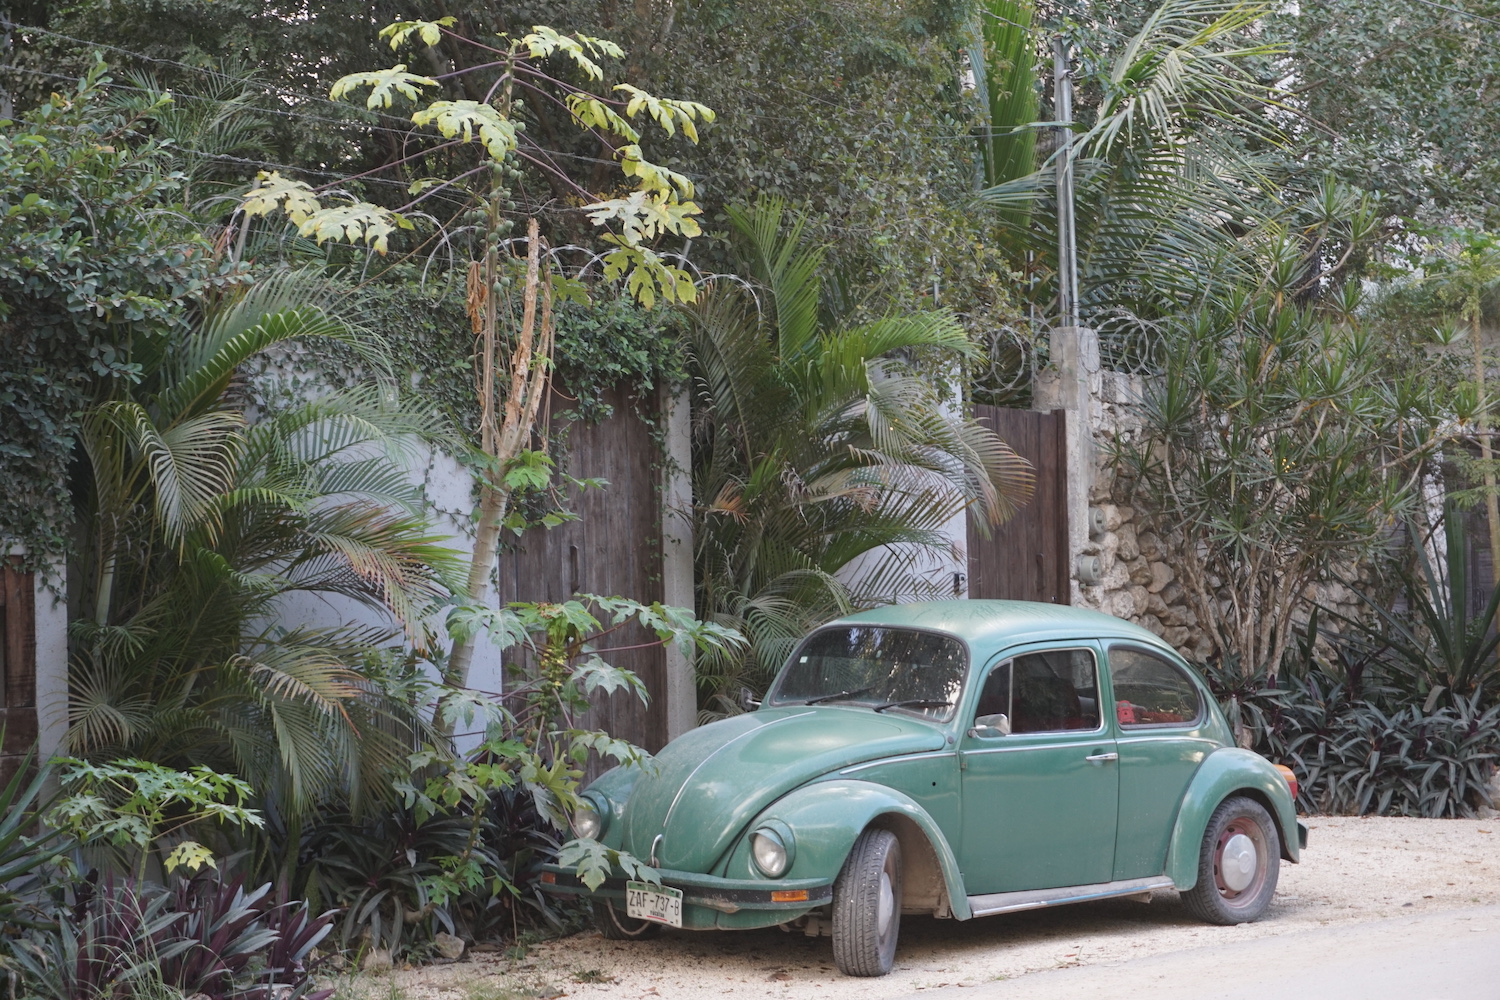 The front of a green classic VW Beetle in Mexico, the front wall of a house and palm trees visible in the background.